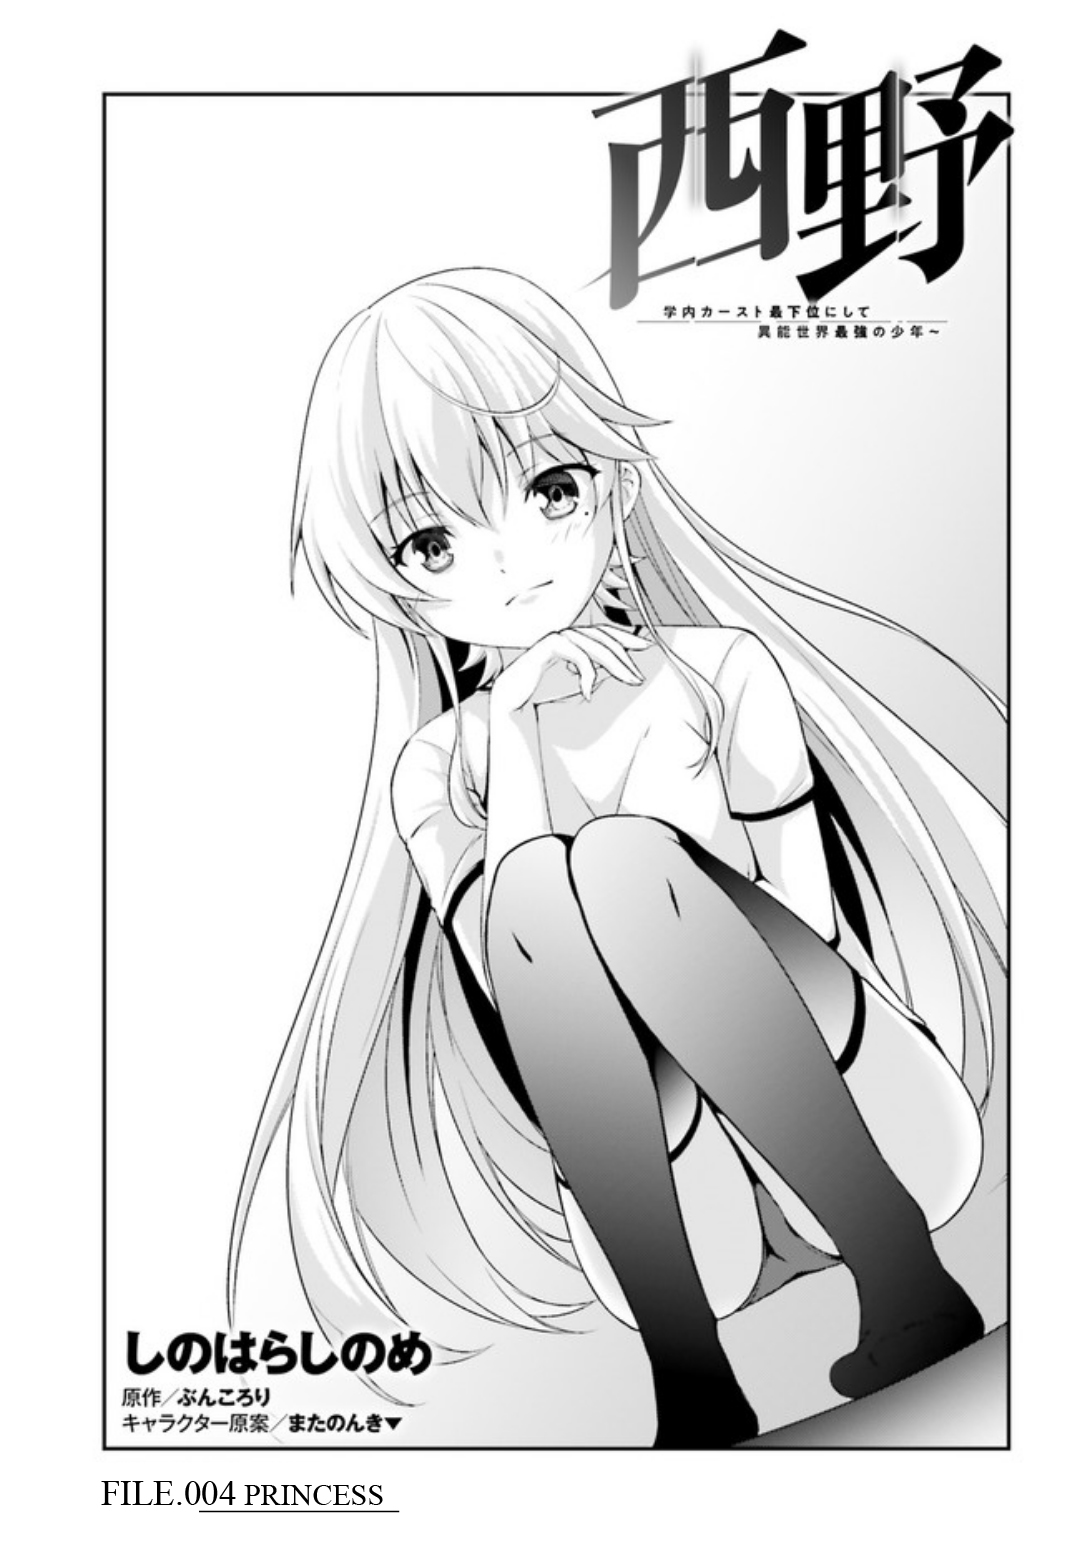 Nishino – The Boy At The Bottom Of The School Caste And Also At The Top Of The Underground Ch. 4 File.004 Princess